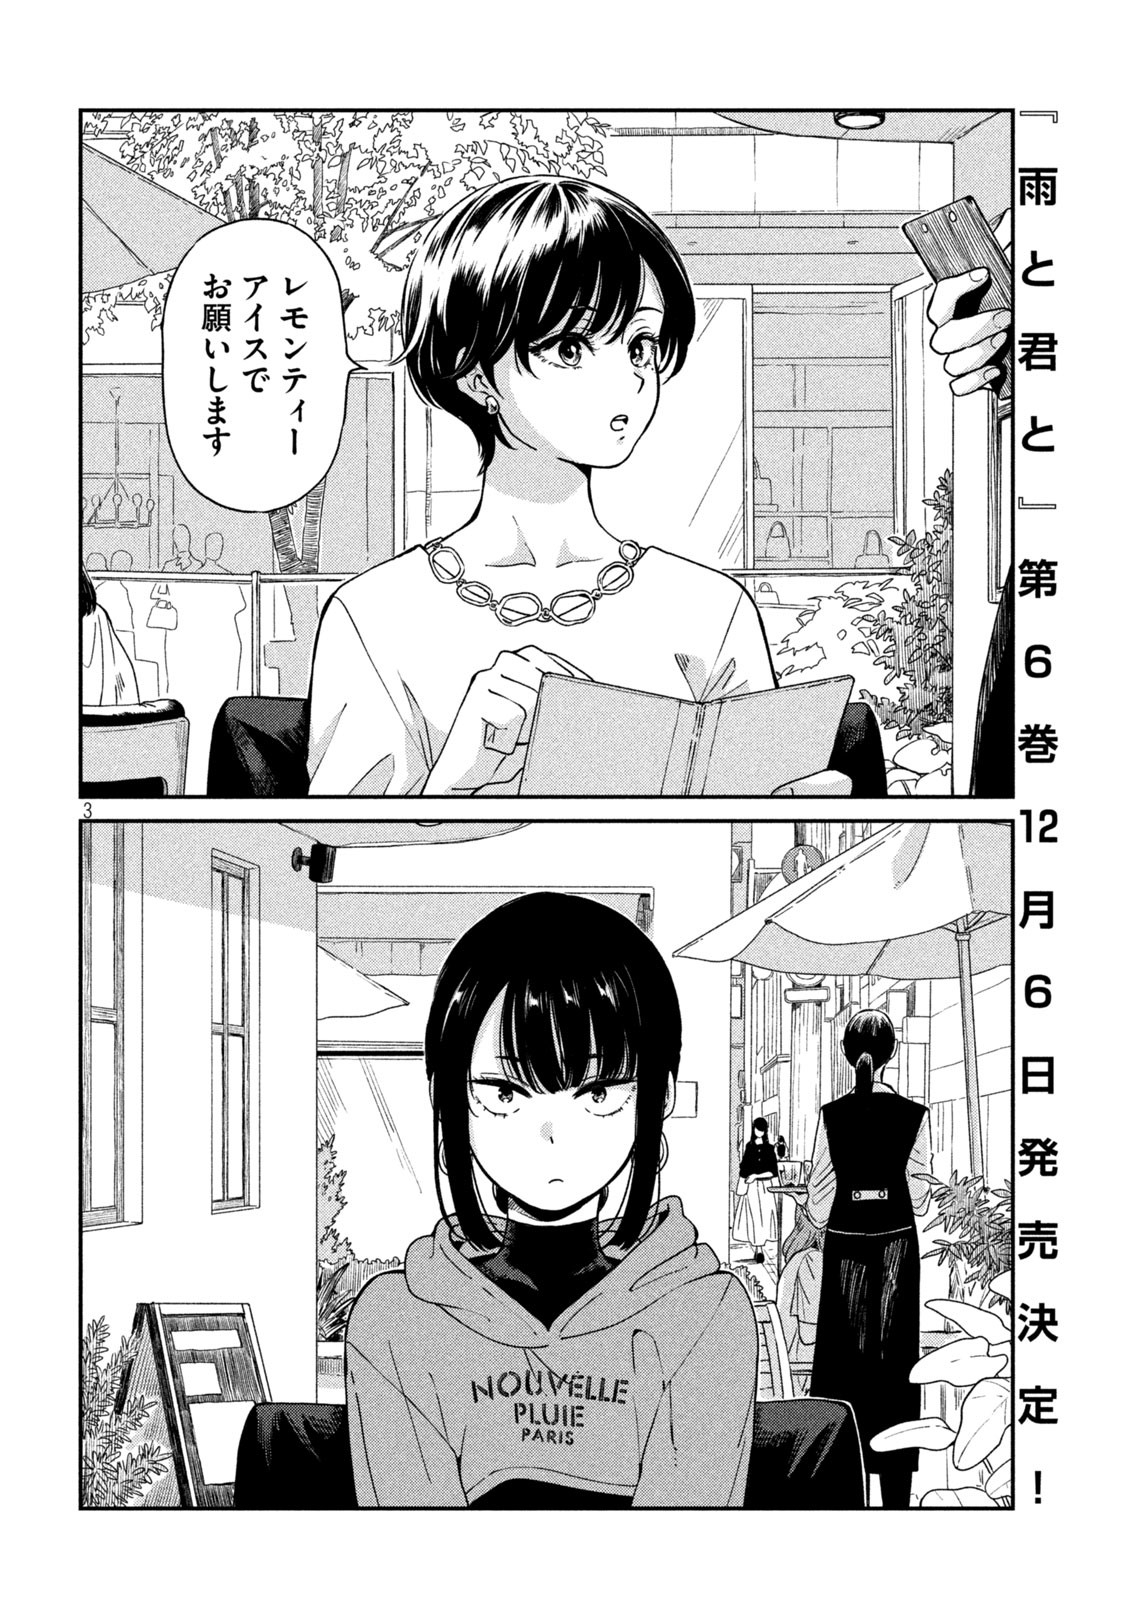 Ame to Kimi to - Chapter 100 - Page 3